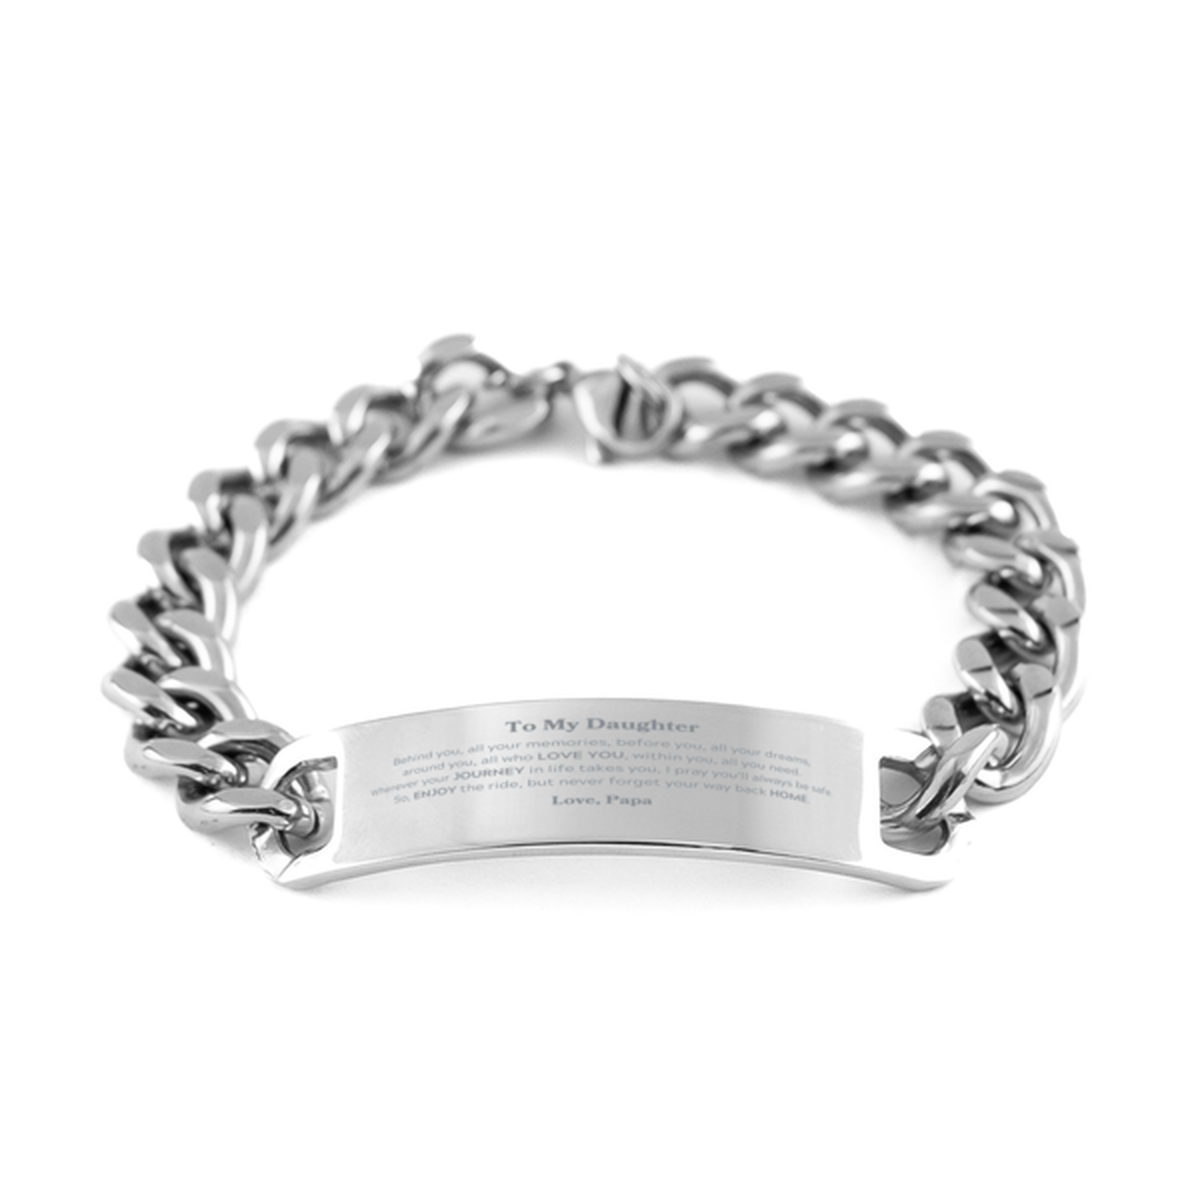 To My Daughter Graduation Gifts from Papa, Daughter Cuban Chain Stainless Steel Bracelet Christmas Birthday Gifts for Daughter Behind you, all your memories, before you, all your dreams. Love, Papa